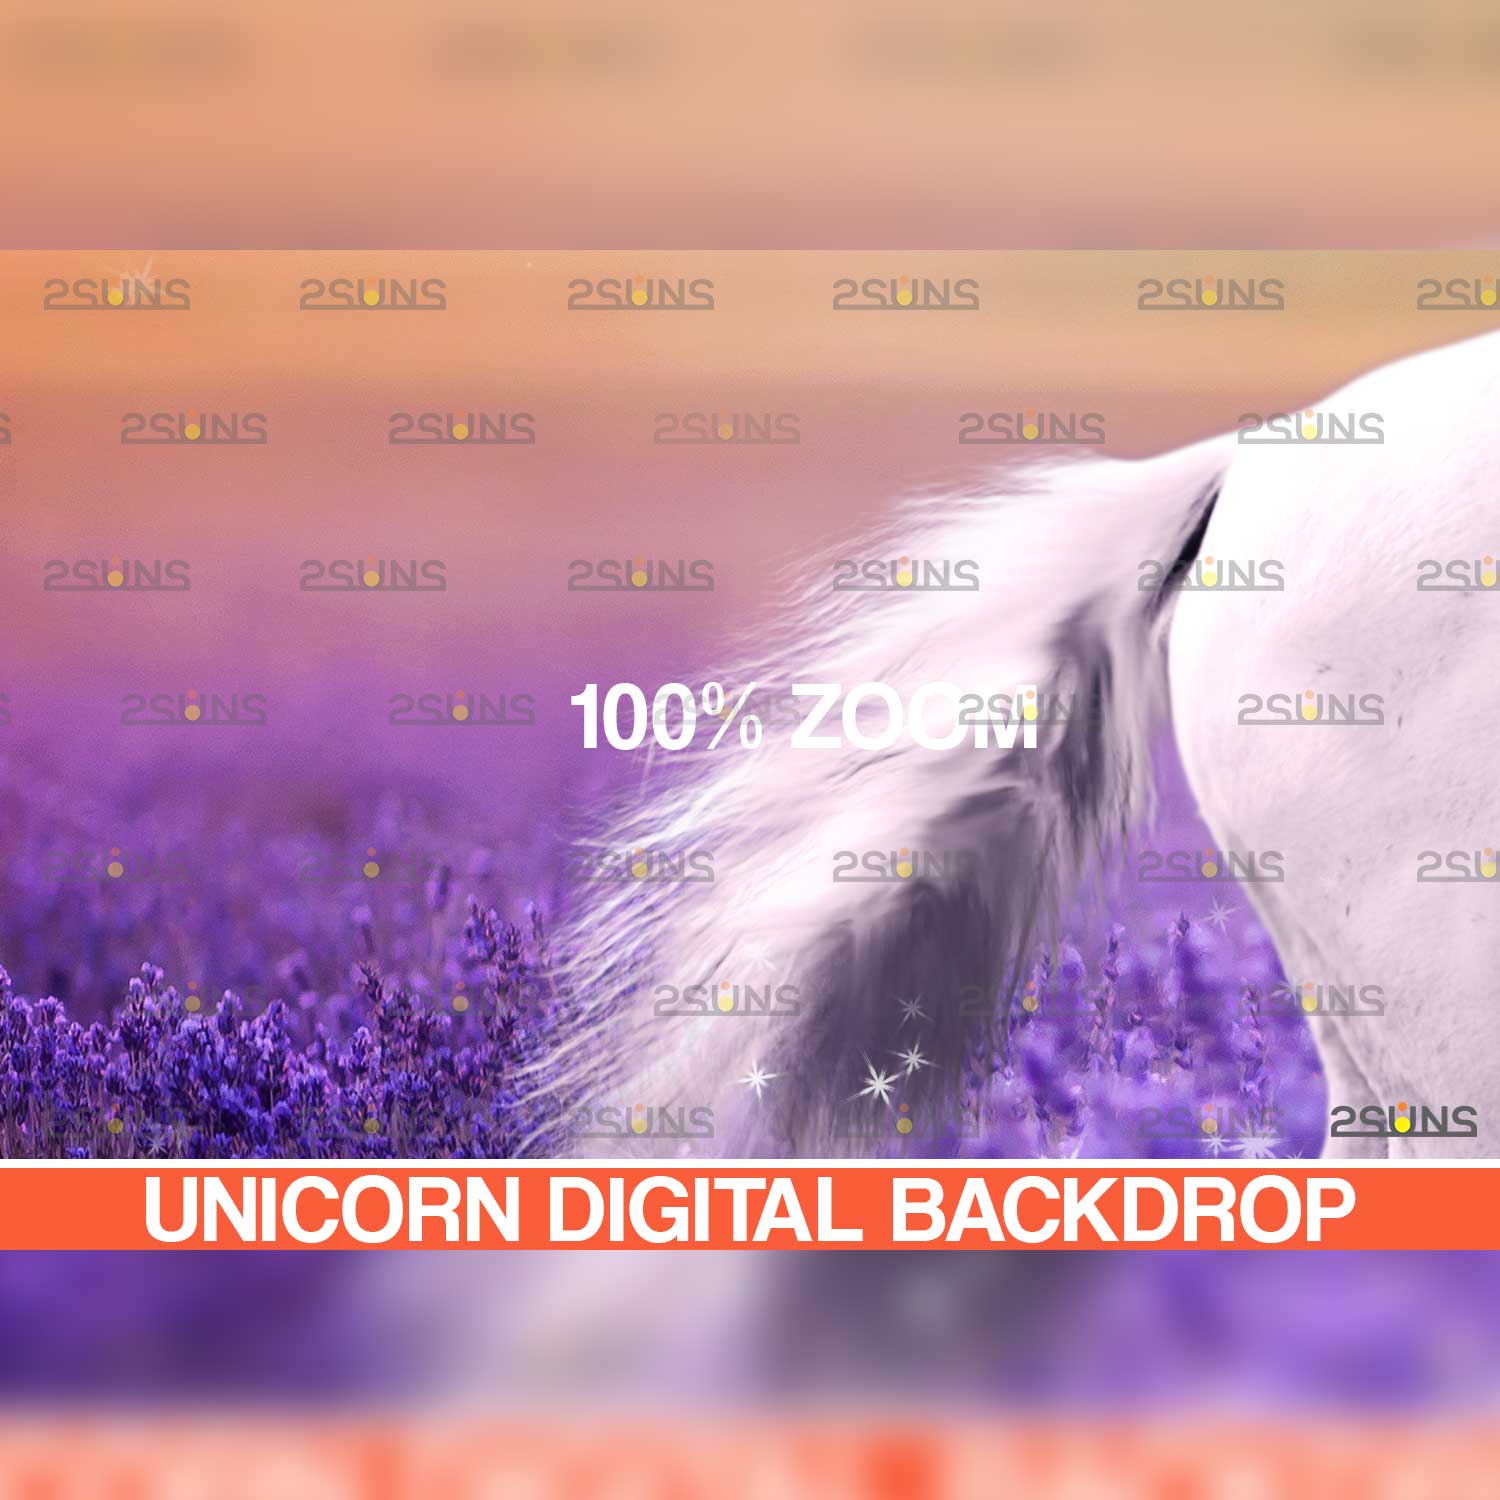 Unicorn Floral Digital Backdrop Background Tail Example.